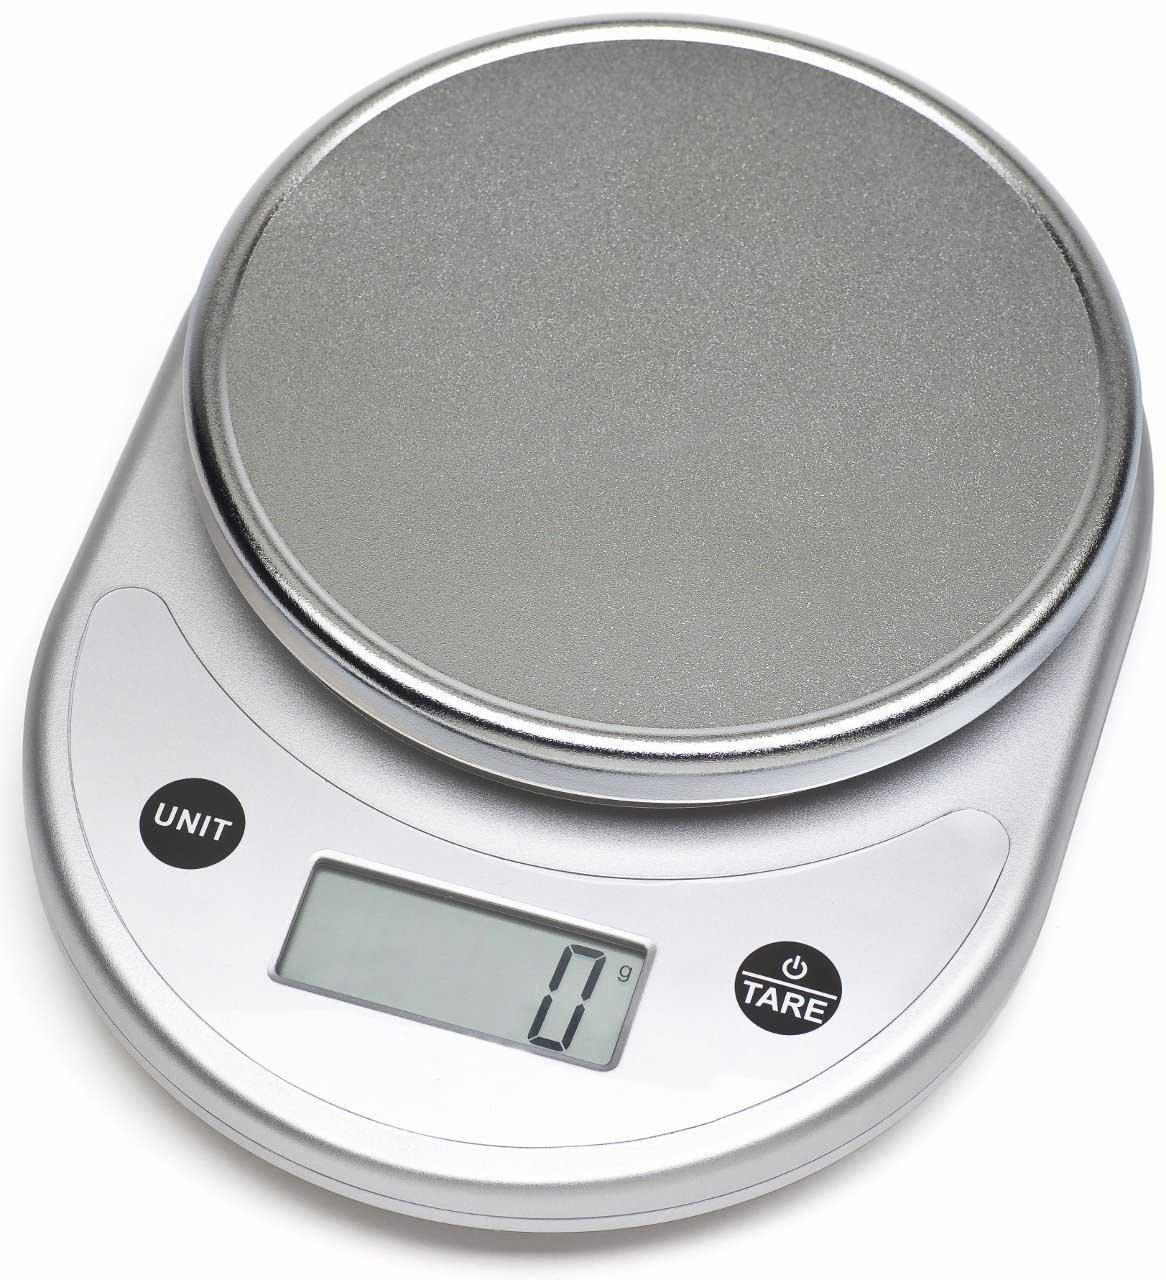 Mosiso - Pro Digital Kitchen Food Scale, 1g to 11 lbs Capacity (Silver)